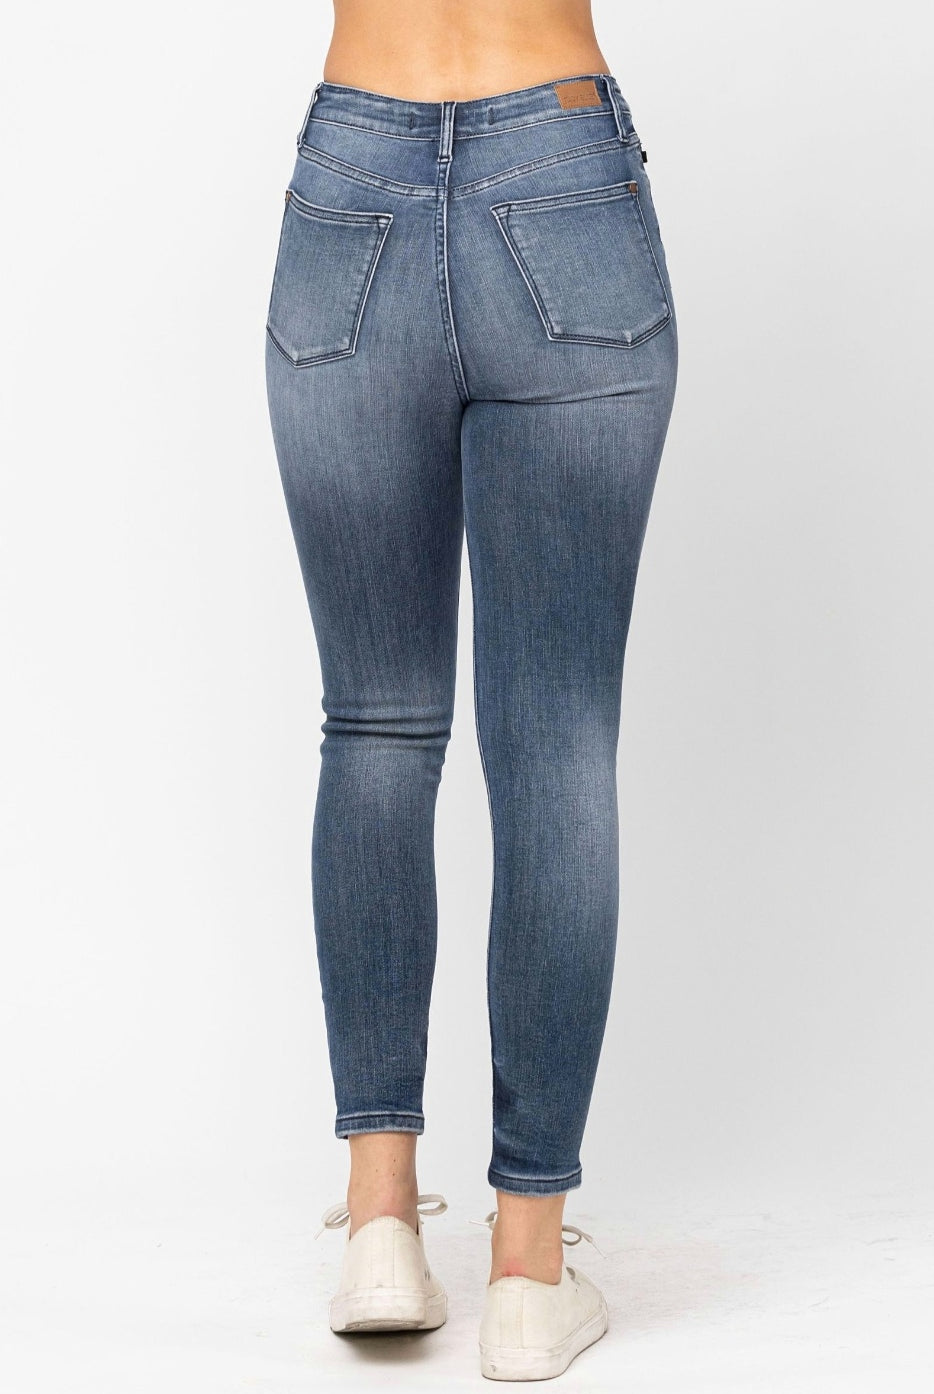 The Danielle Mid Rise Tummy Control Judy Blue Jeans